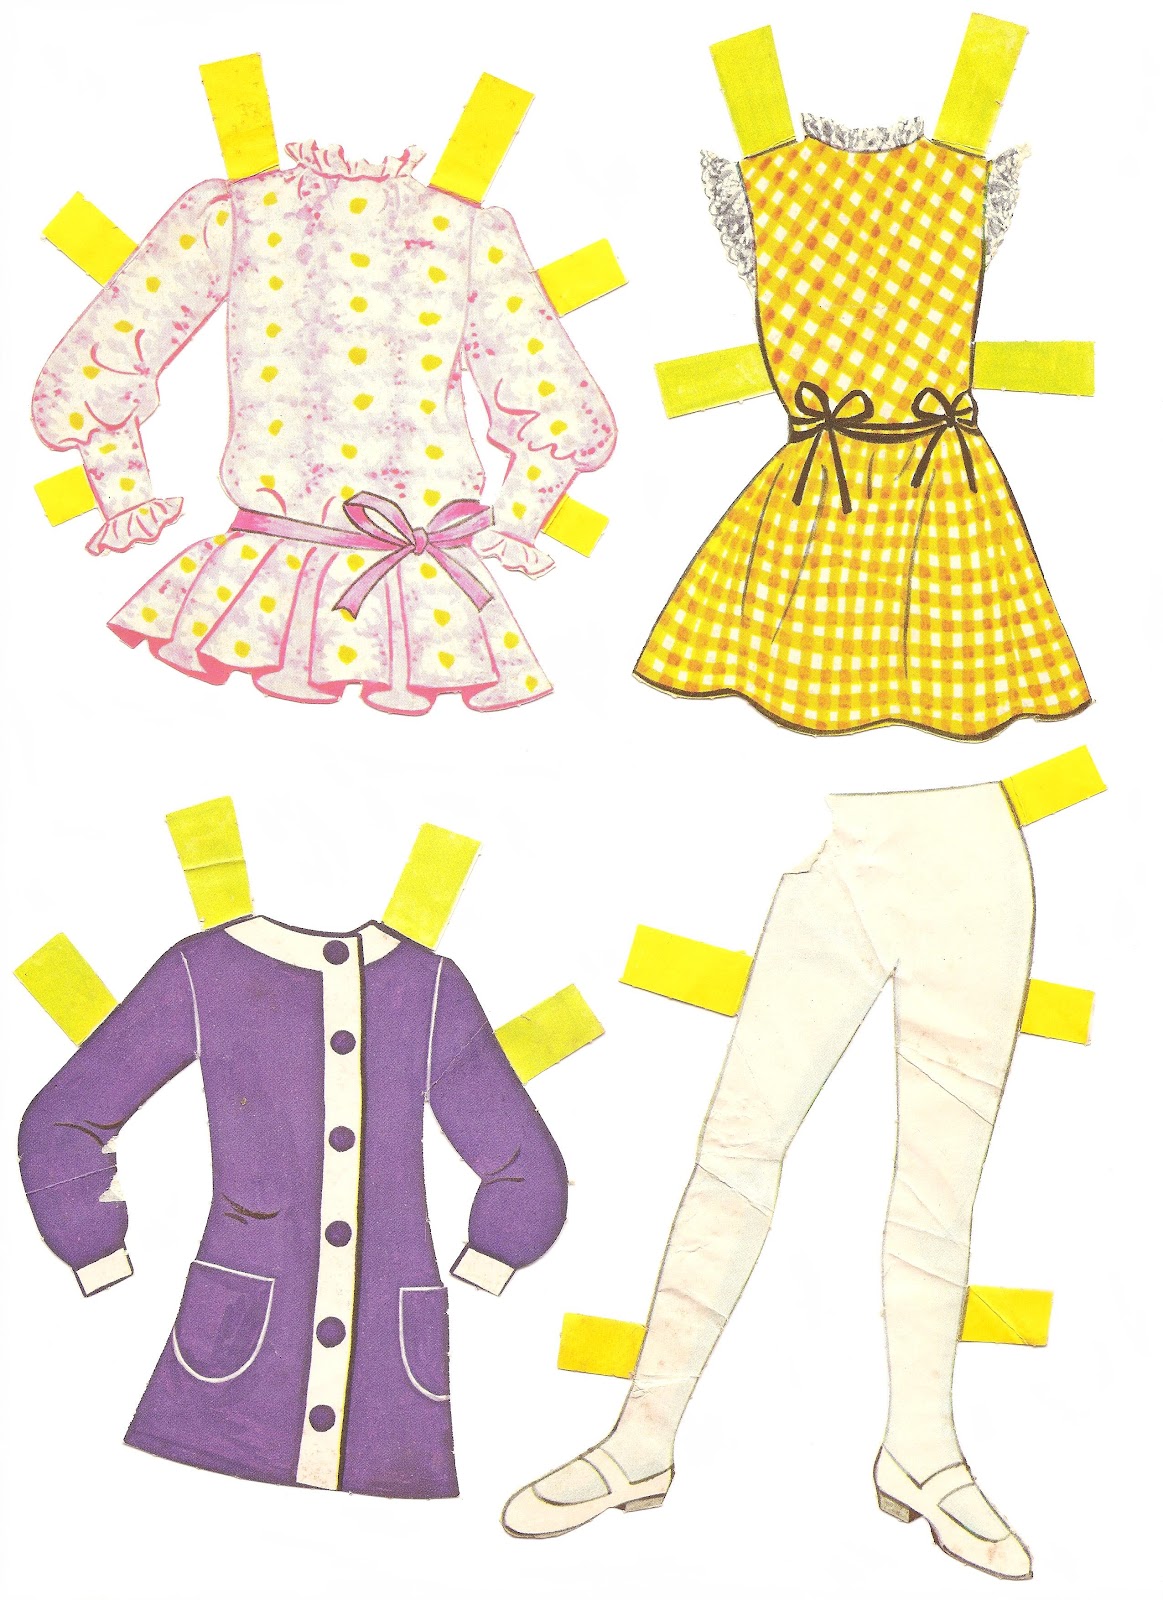 Mostly Paper Dolls: My CHRISSY Paper Doll